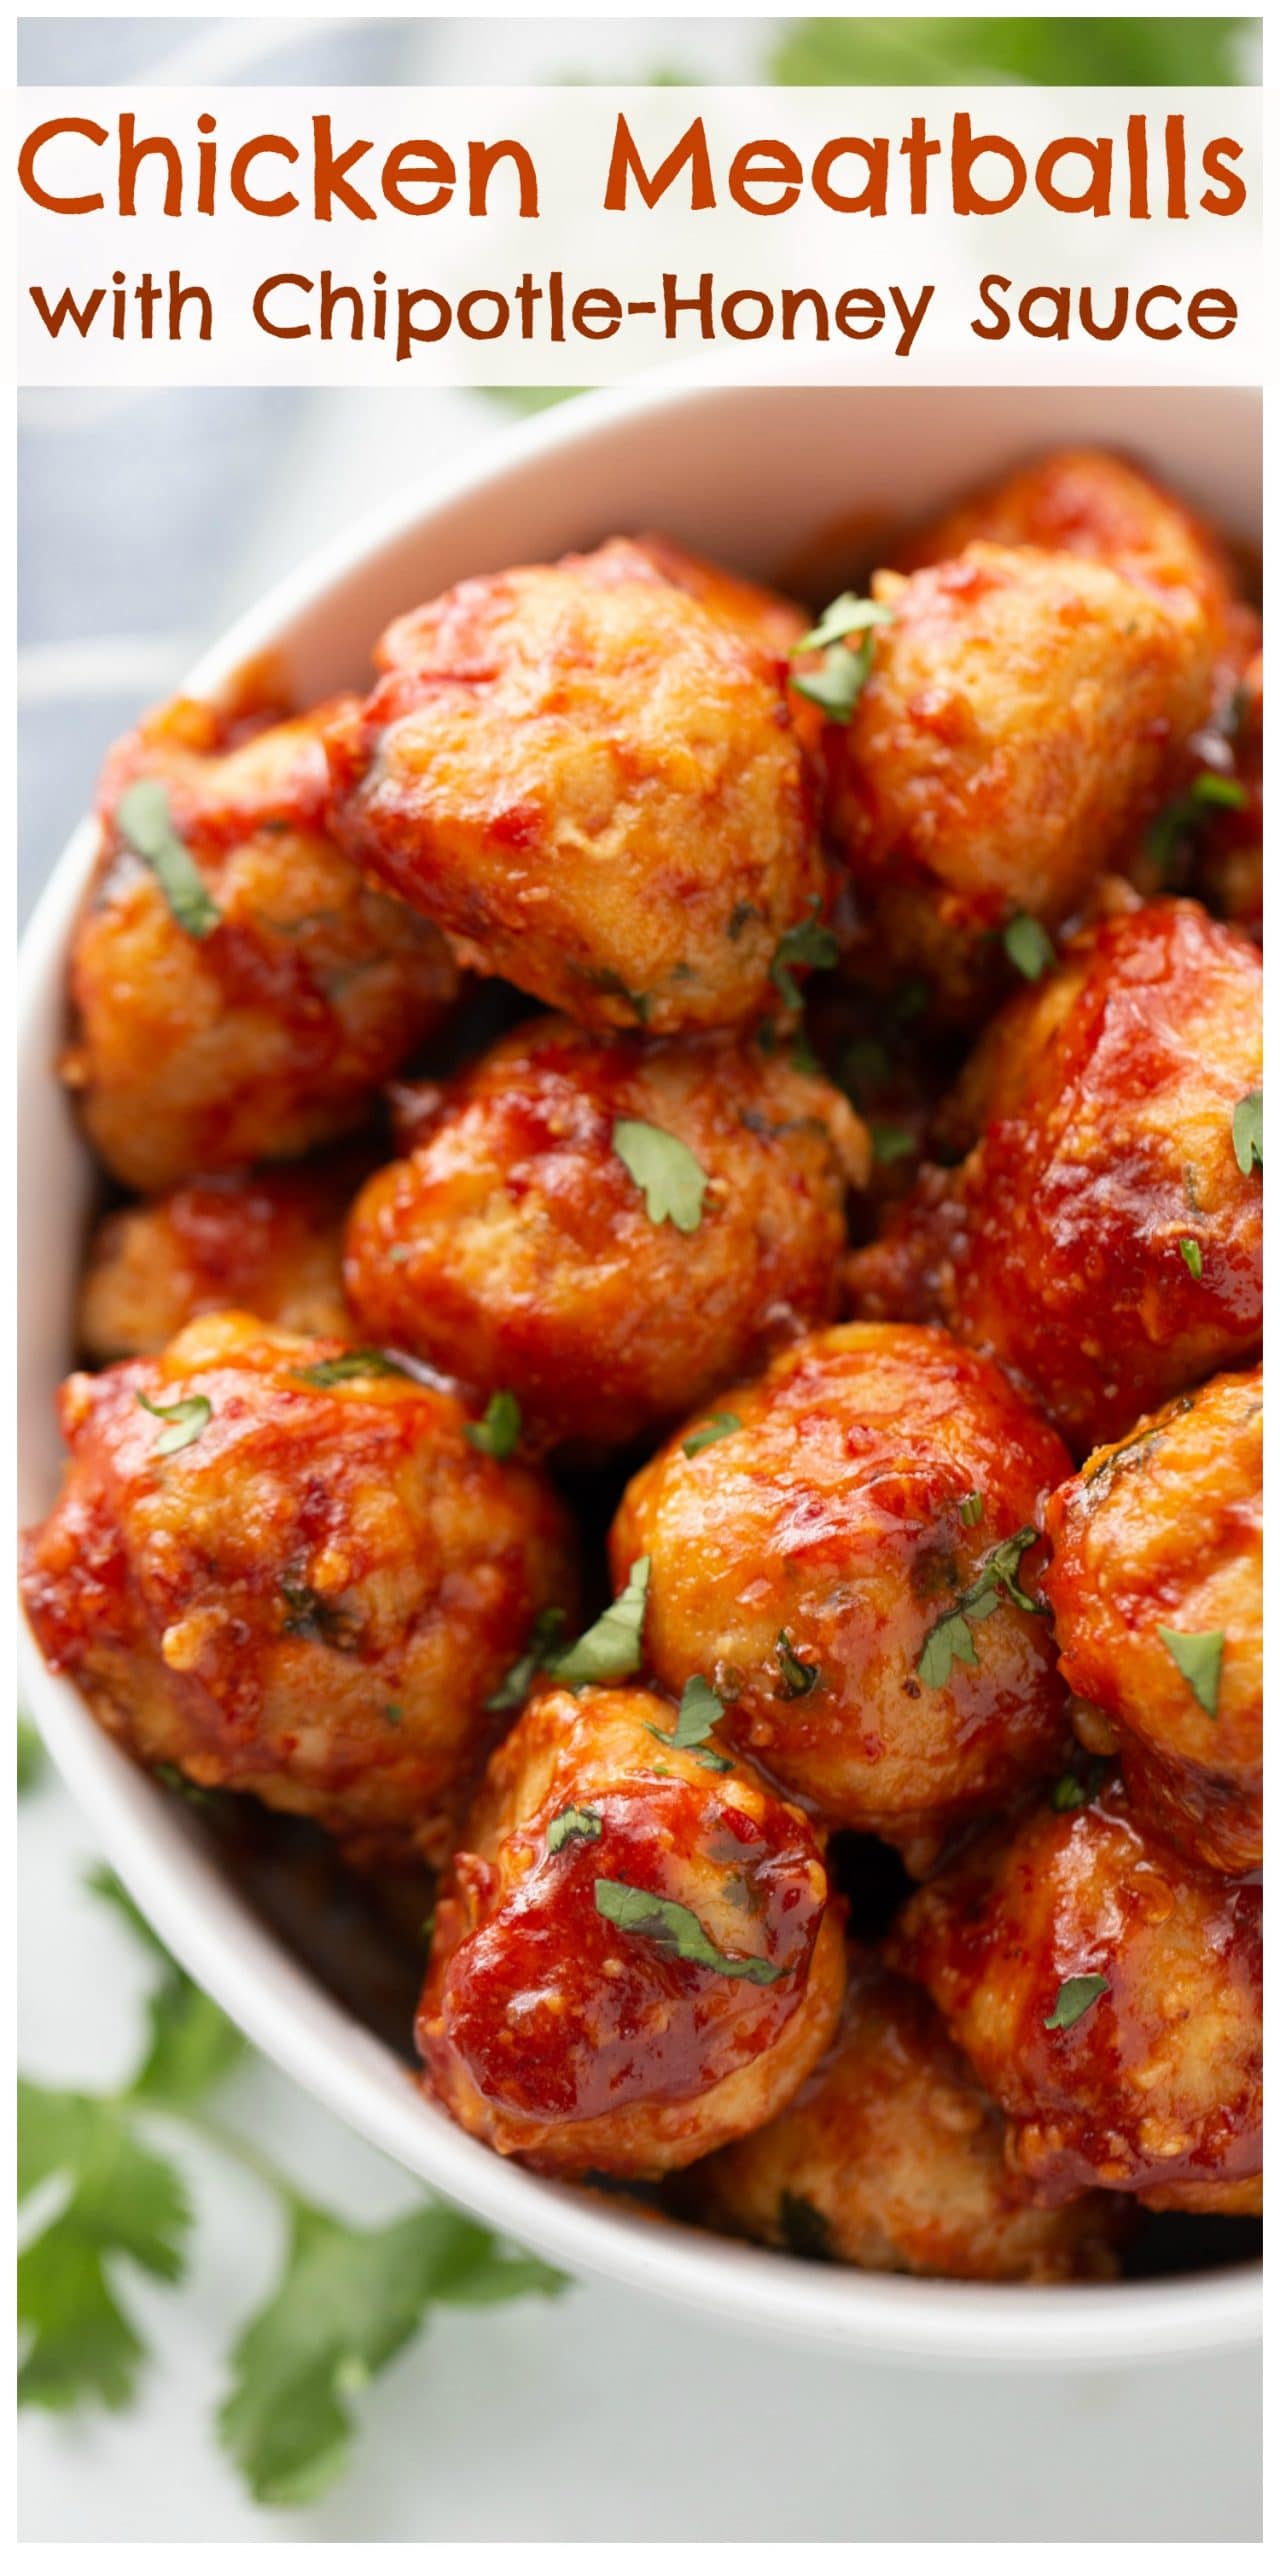 Chicken Meatballs with Chipotle-Honey Sauce - a saucy and sassy meatball recipe you'll serve again and again. Every bite is packed with flavor making them the perfect choice for game day, holidays or a Friday night. via @cmpollak1